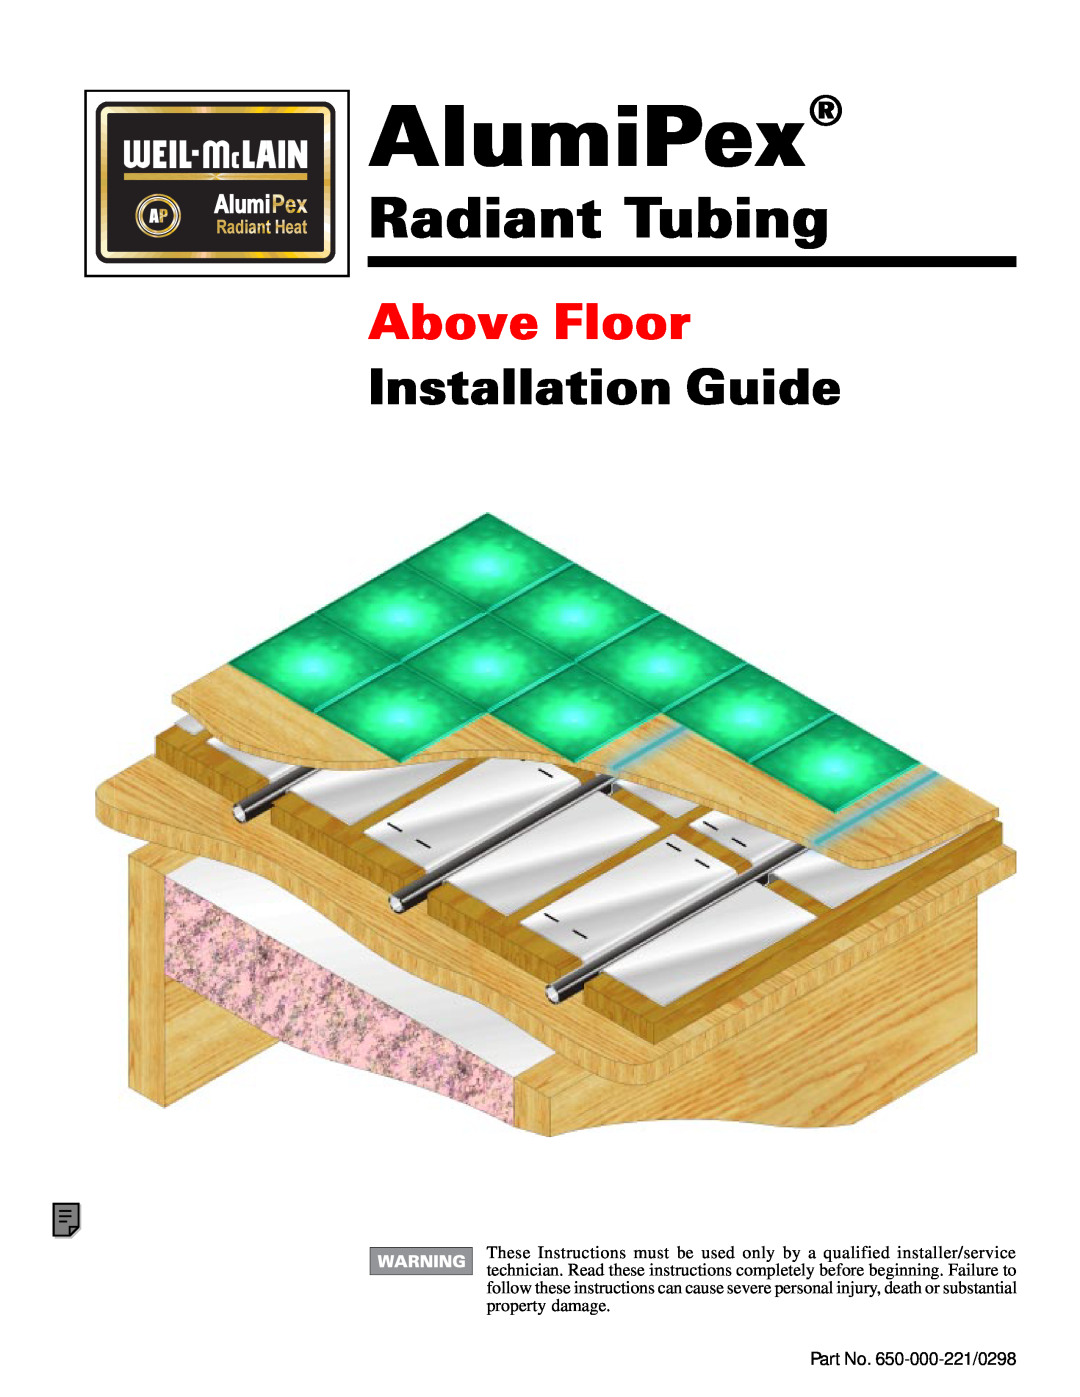 Weil-McLain Radiant Heater manual AlumiPexÆ, AboveFloor, Radiant Tubing, InstallationGuide 